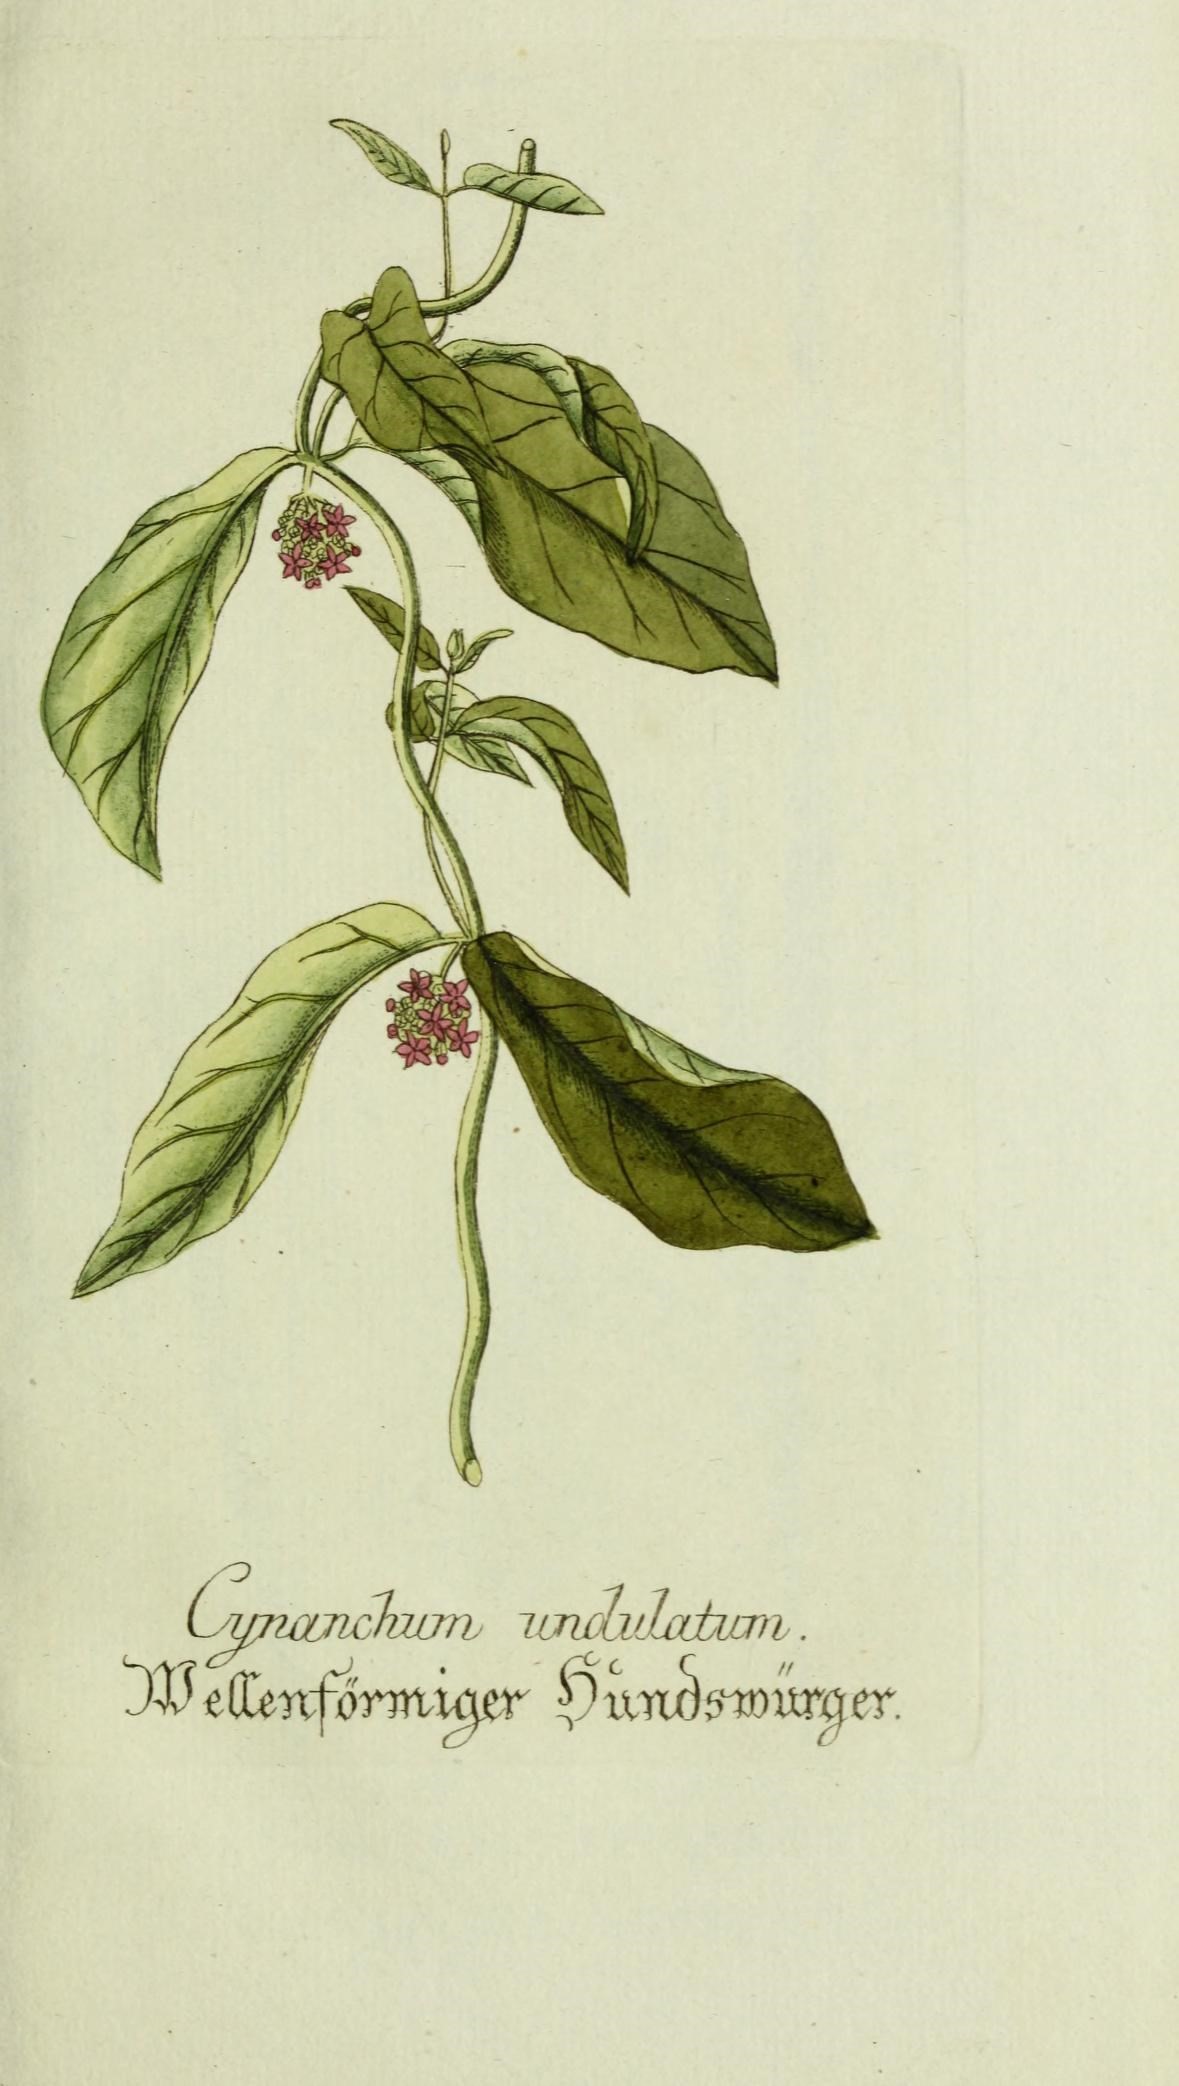 the illustration shows a leafy plant with pink flowers